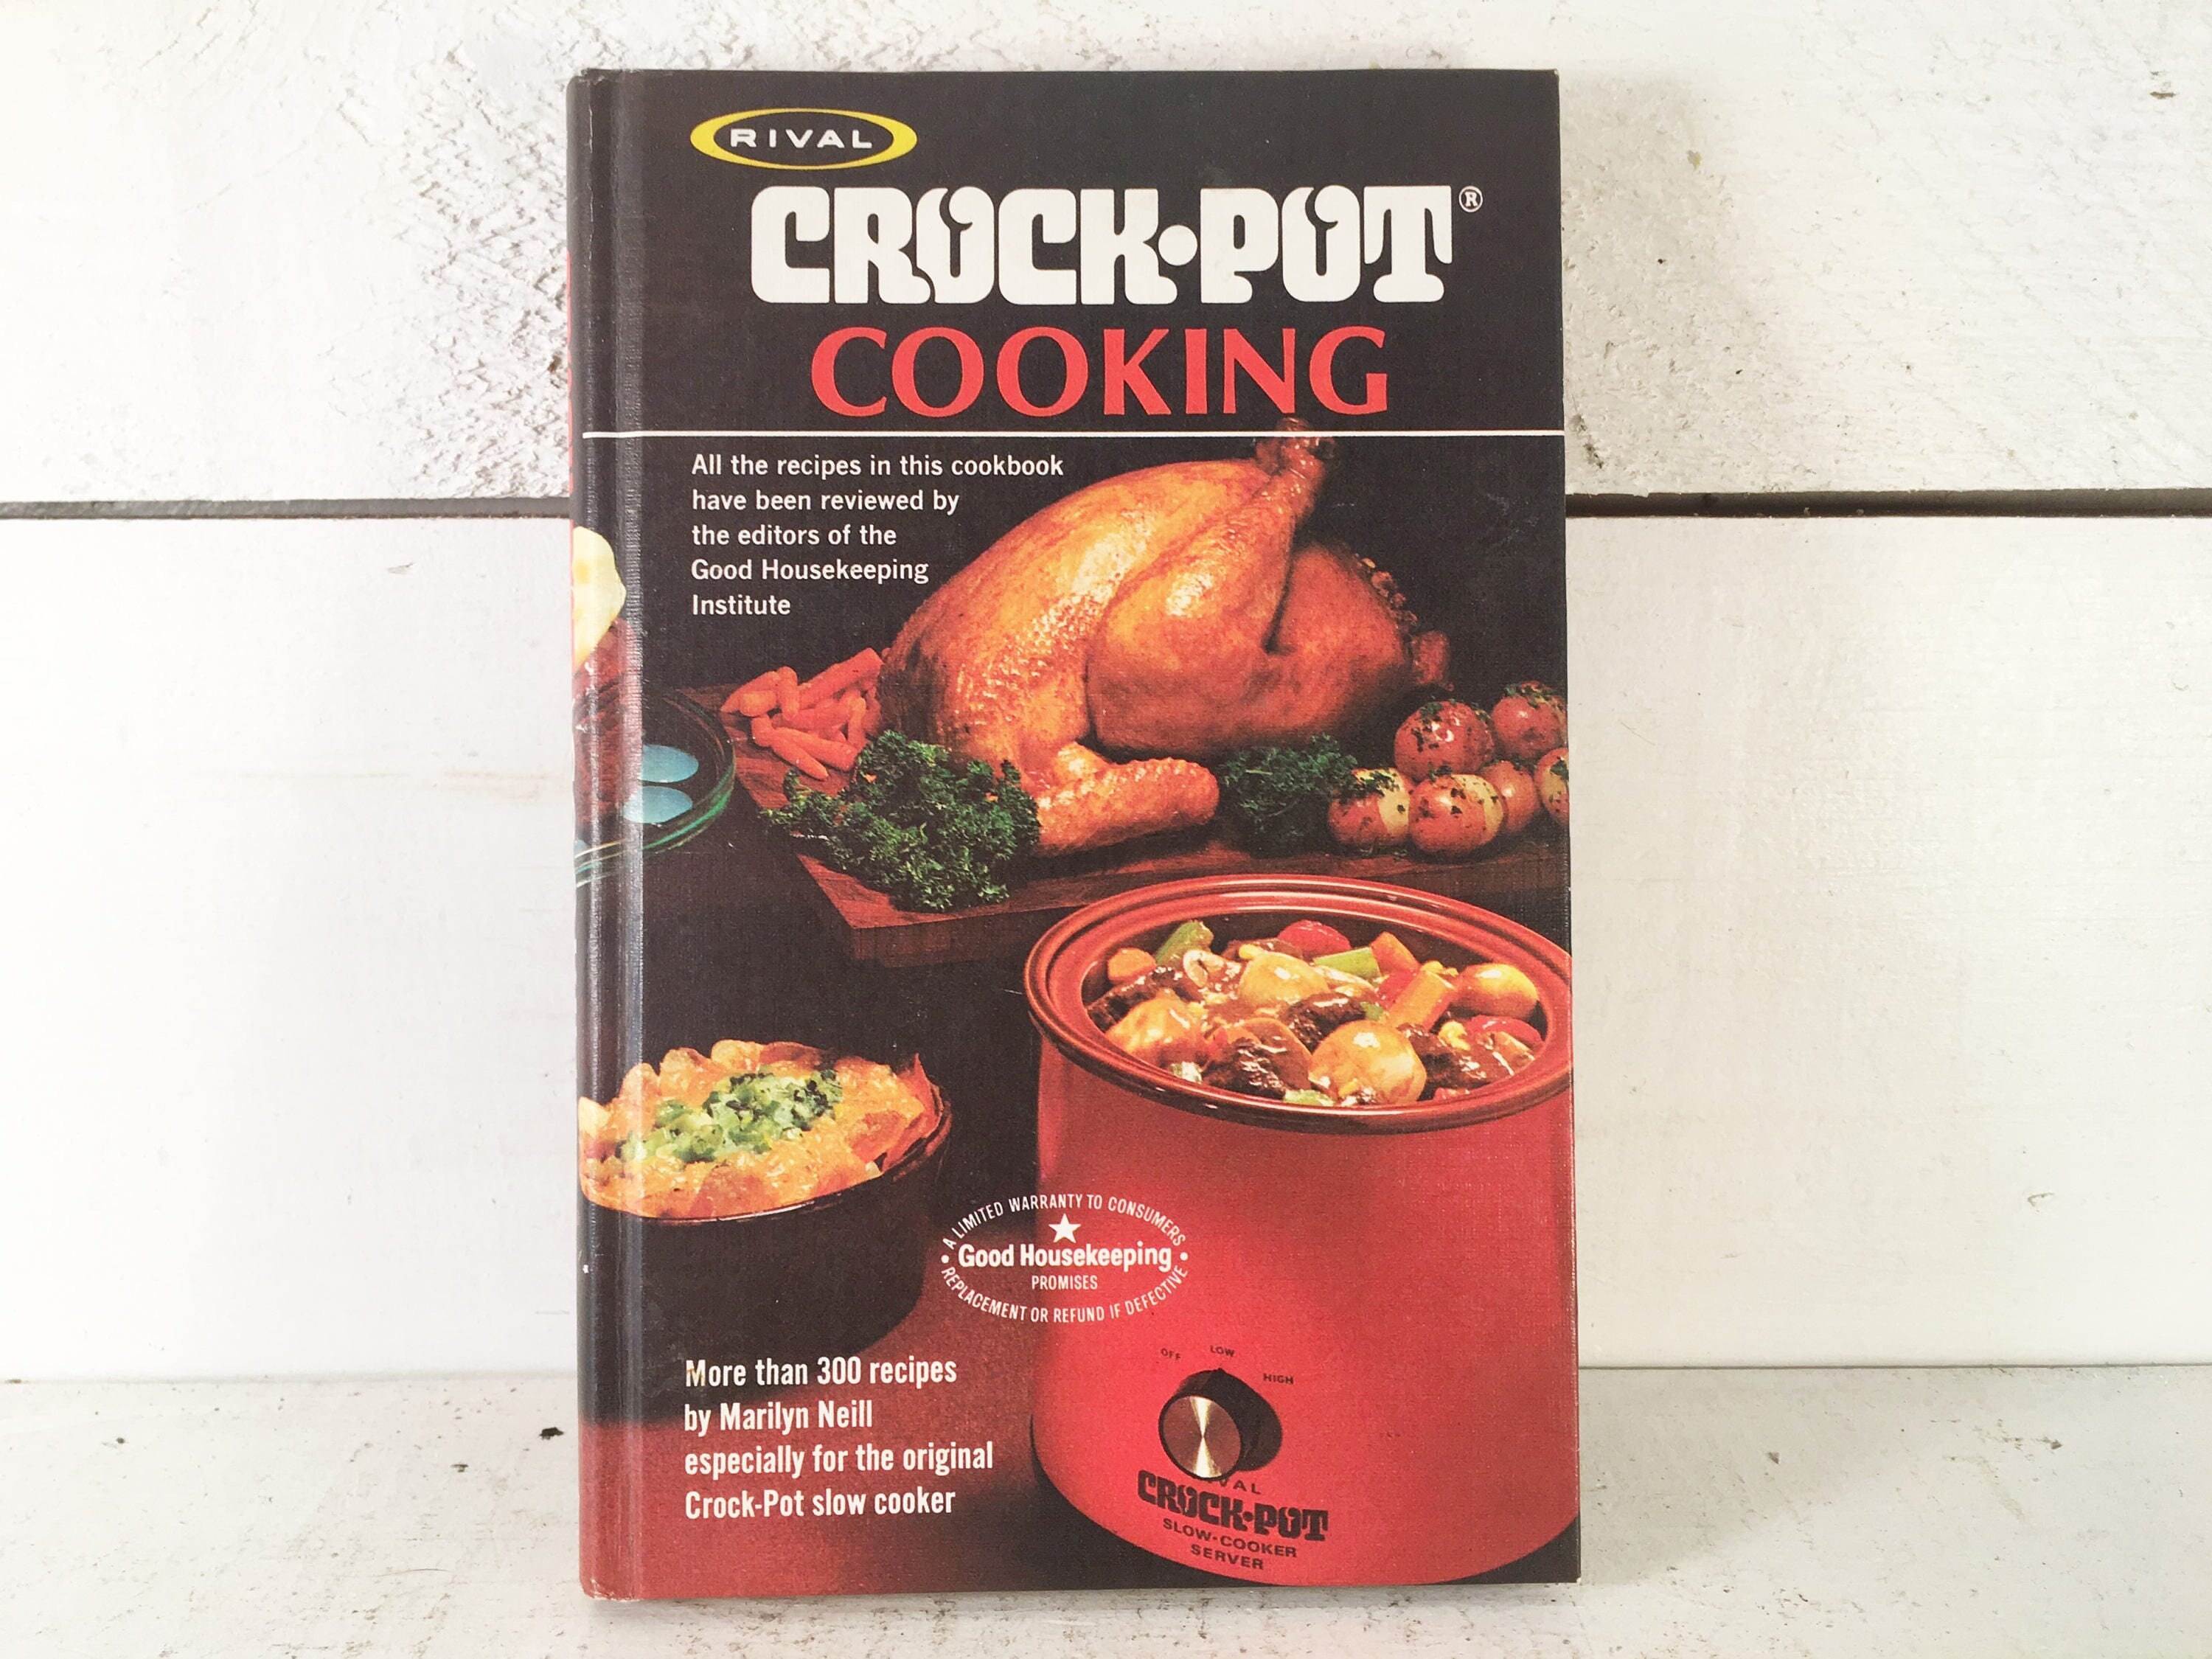 Vintage CROCK POT Cookbook by RIVAL 1975 Edition - TrustedFinds